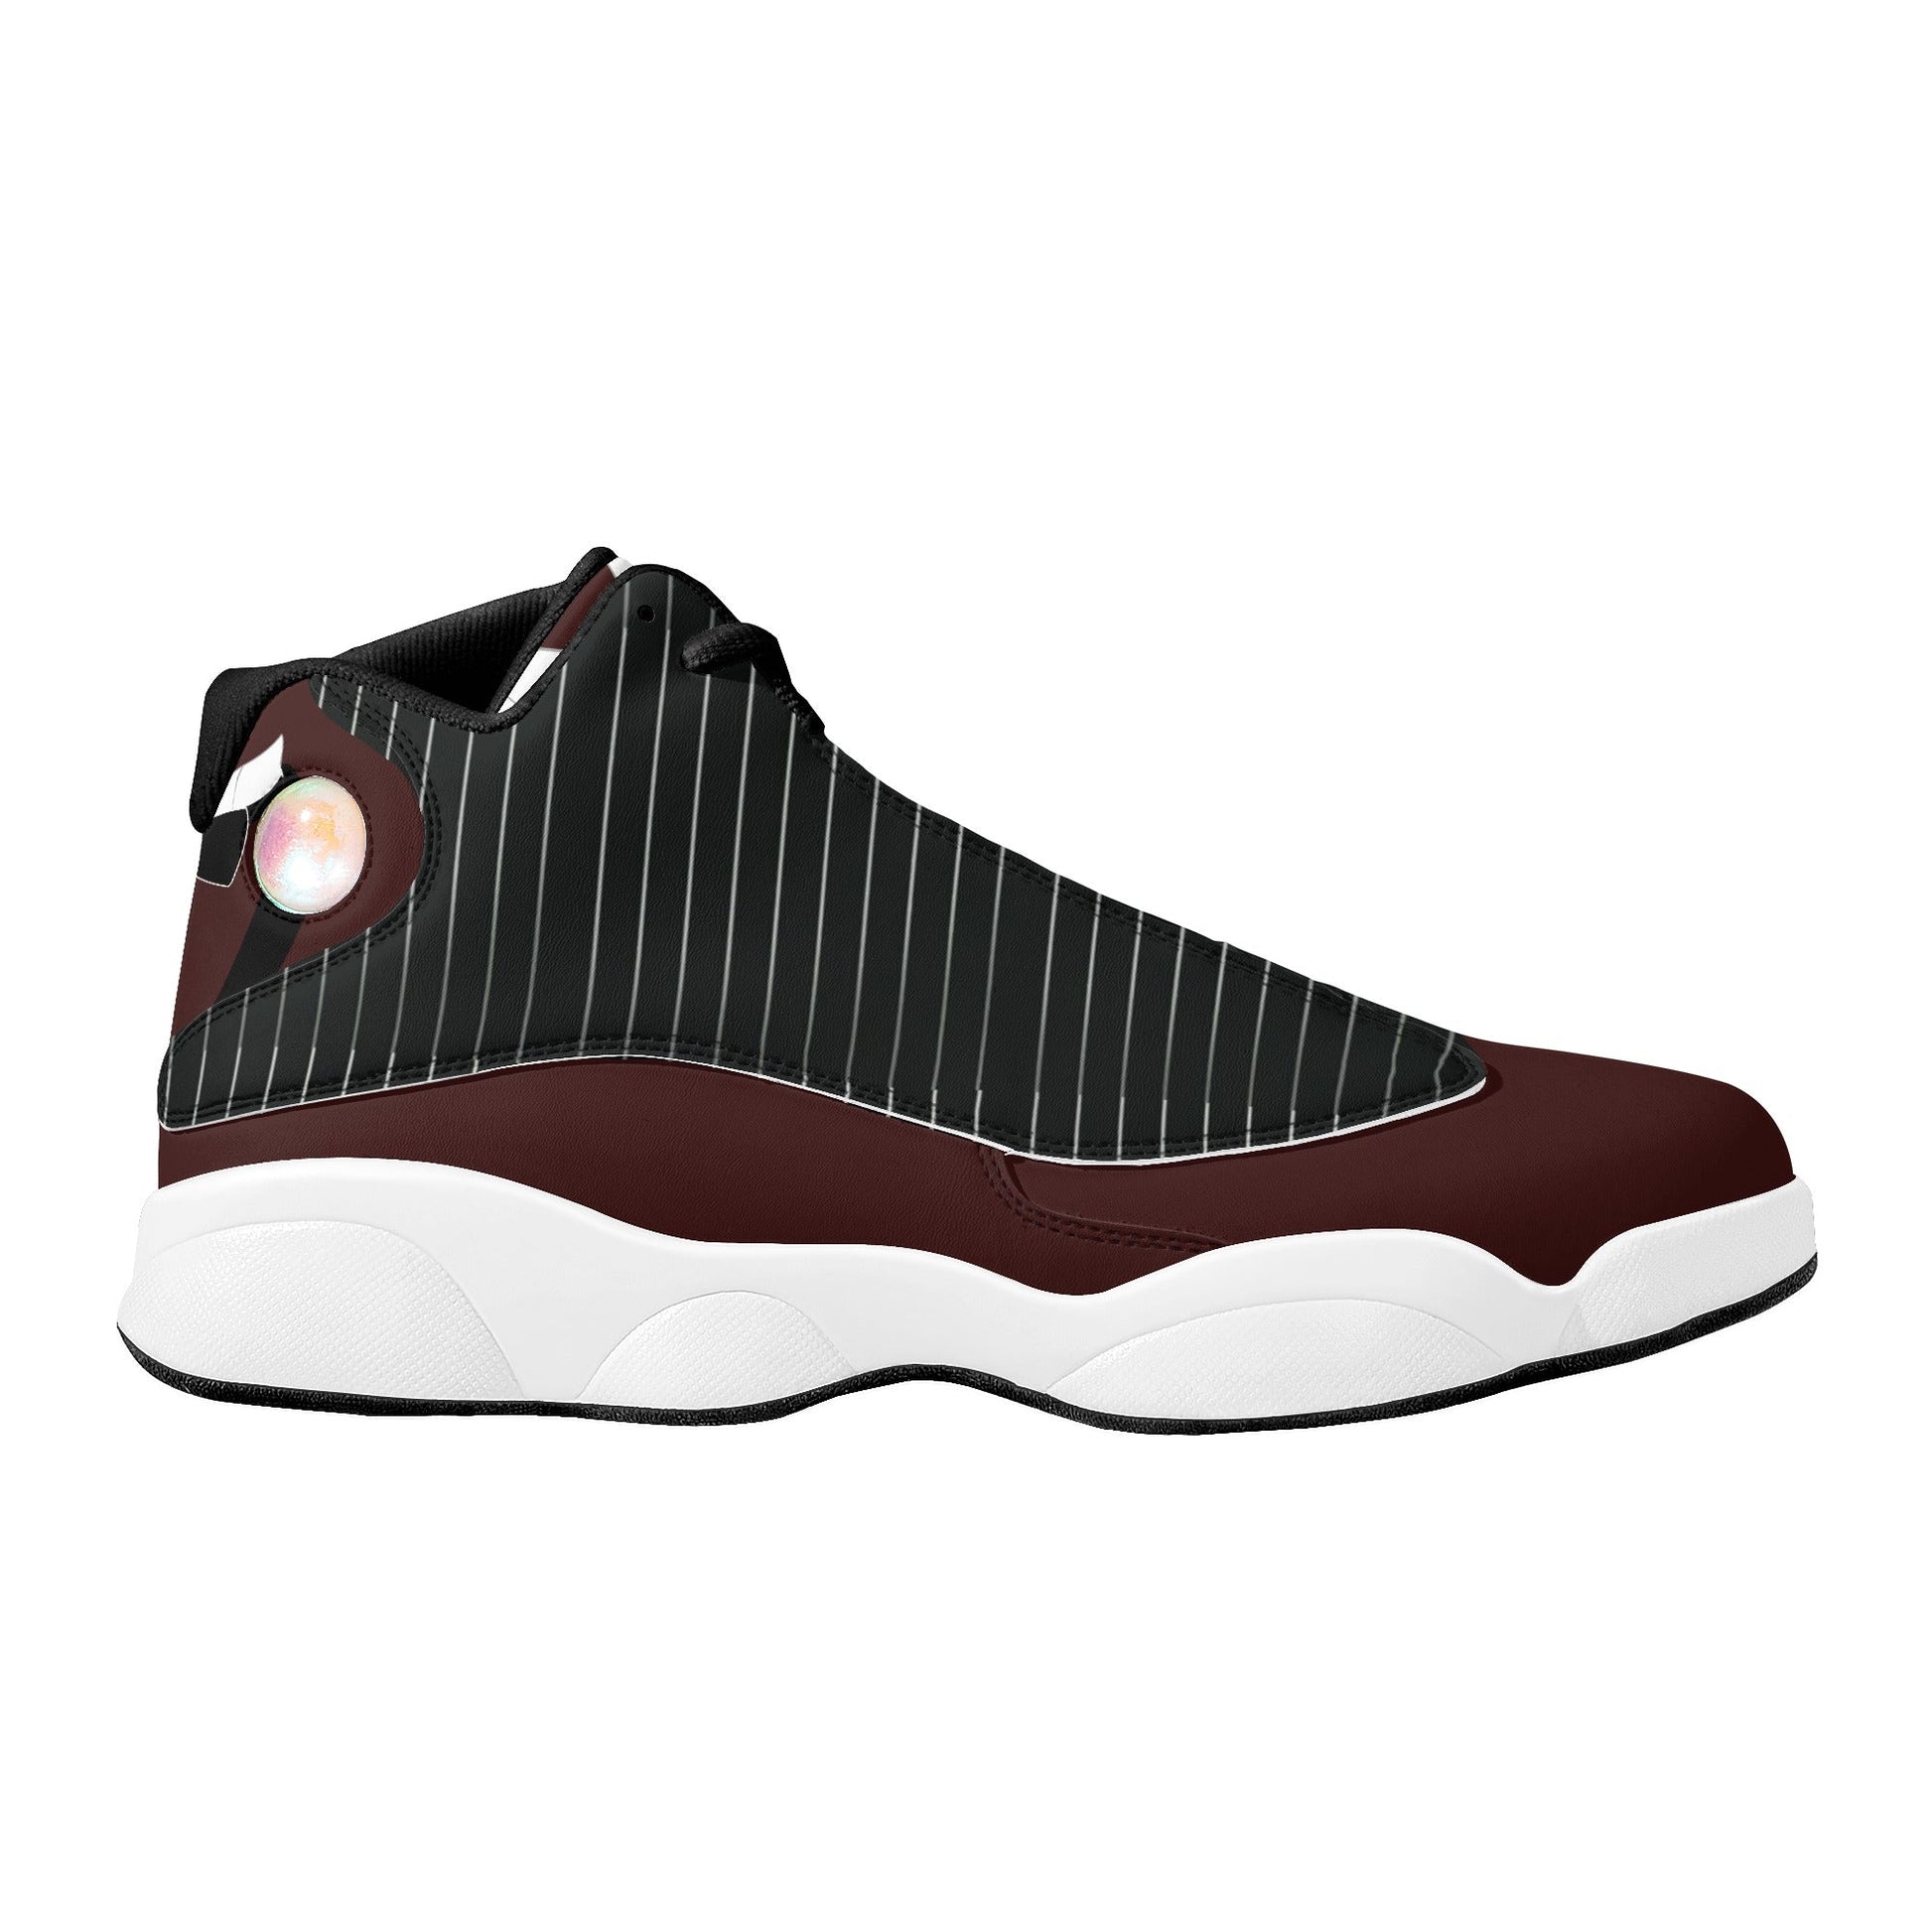 Stand out  with the  Dressed for the Ball Men's White Soles Basketball Shoes  available at Hey Nugget. Grab yours today!